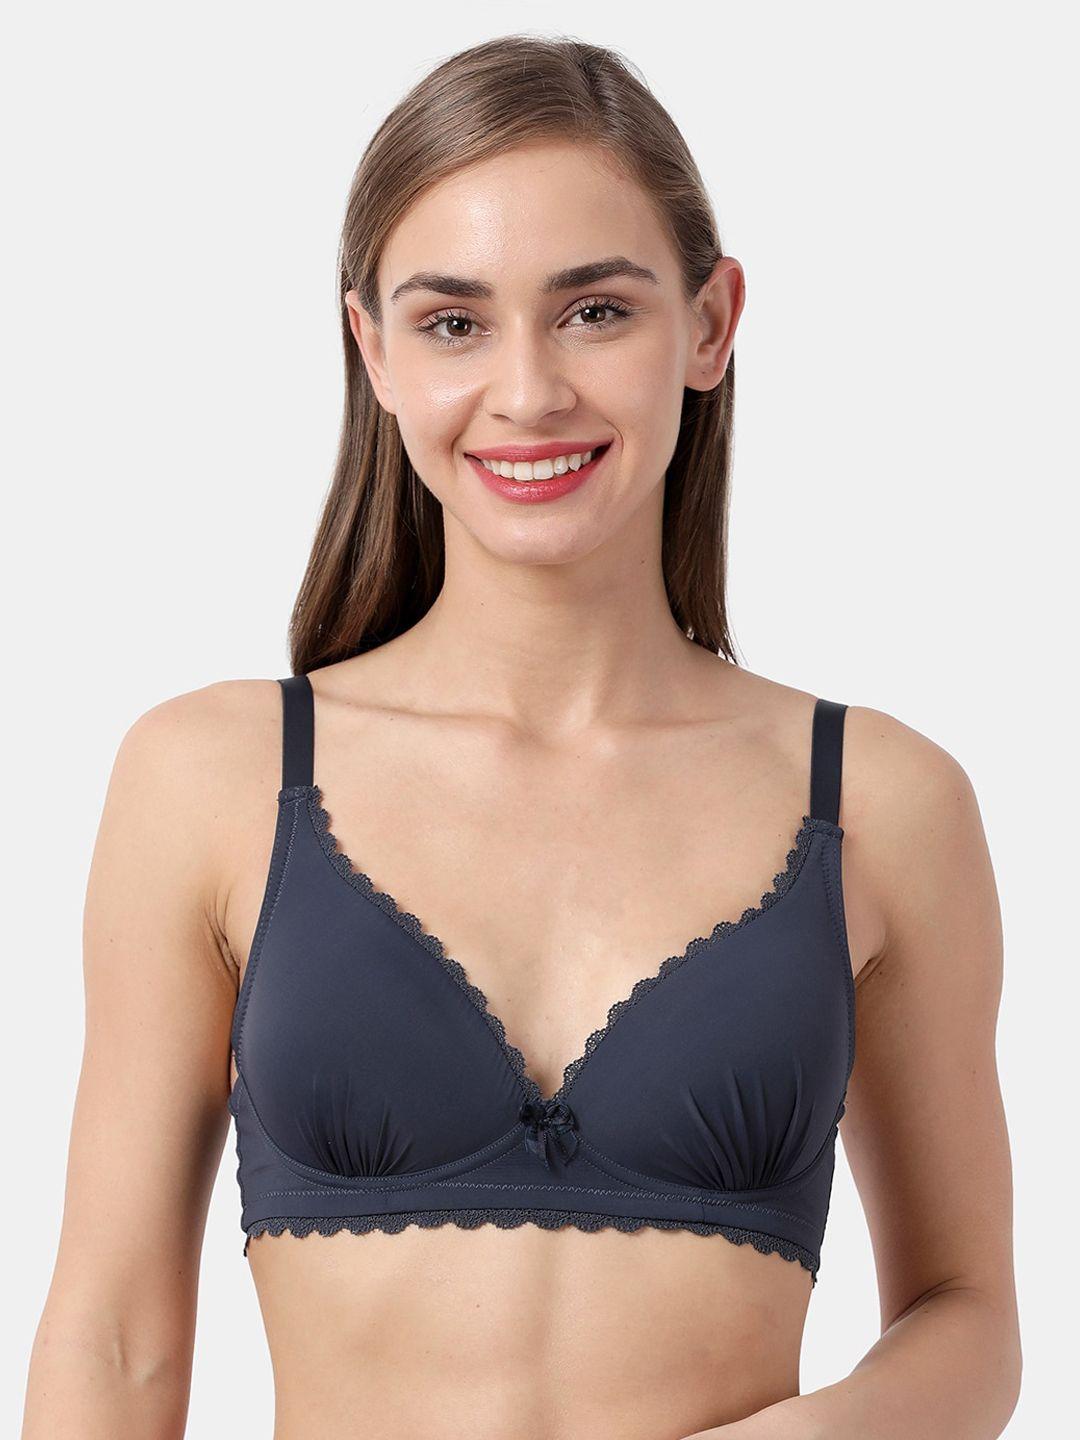 shyaway-navy-blue-solid-non-wired-lightly-padded-plunge-bra